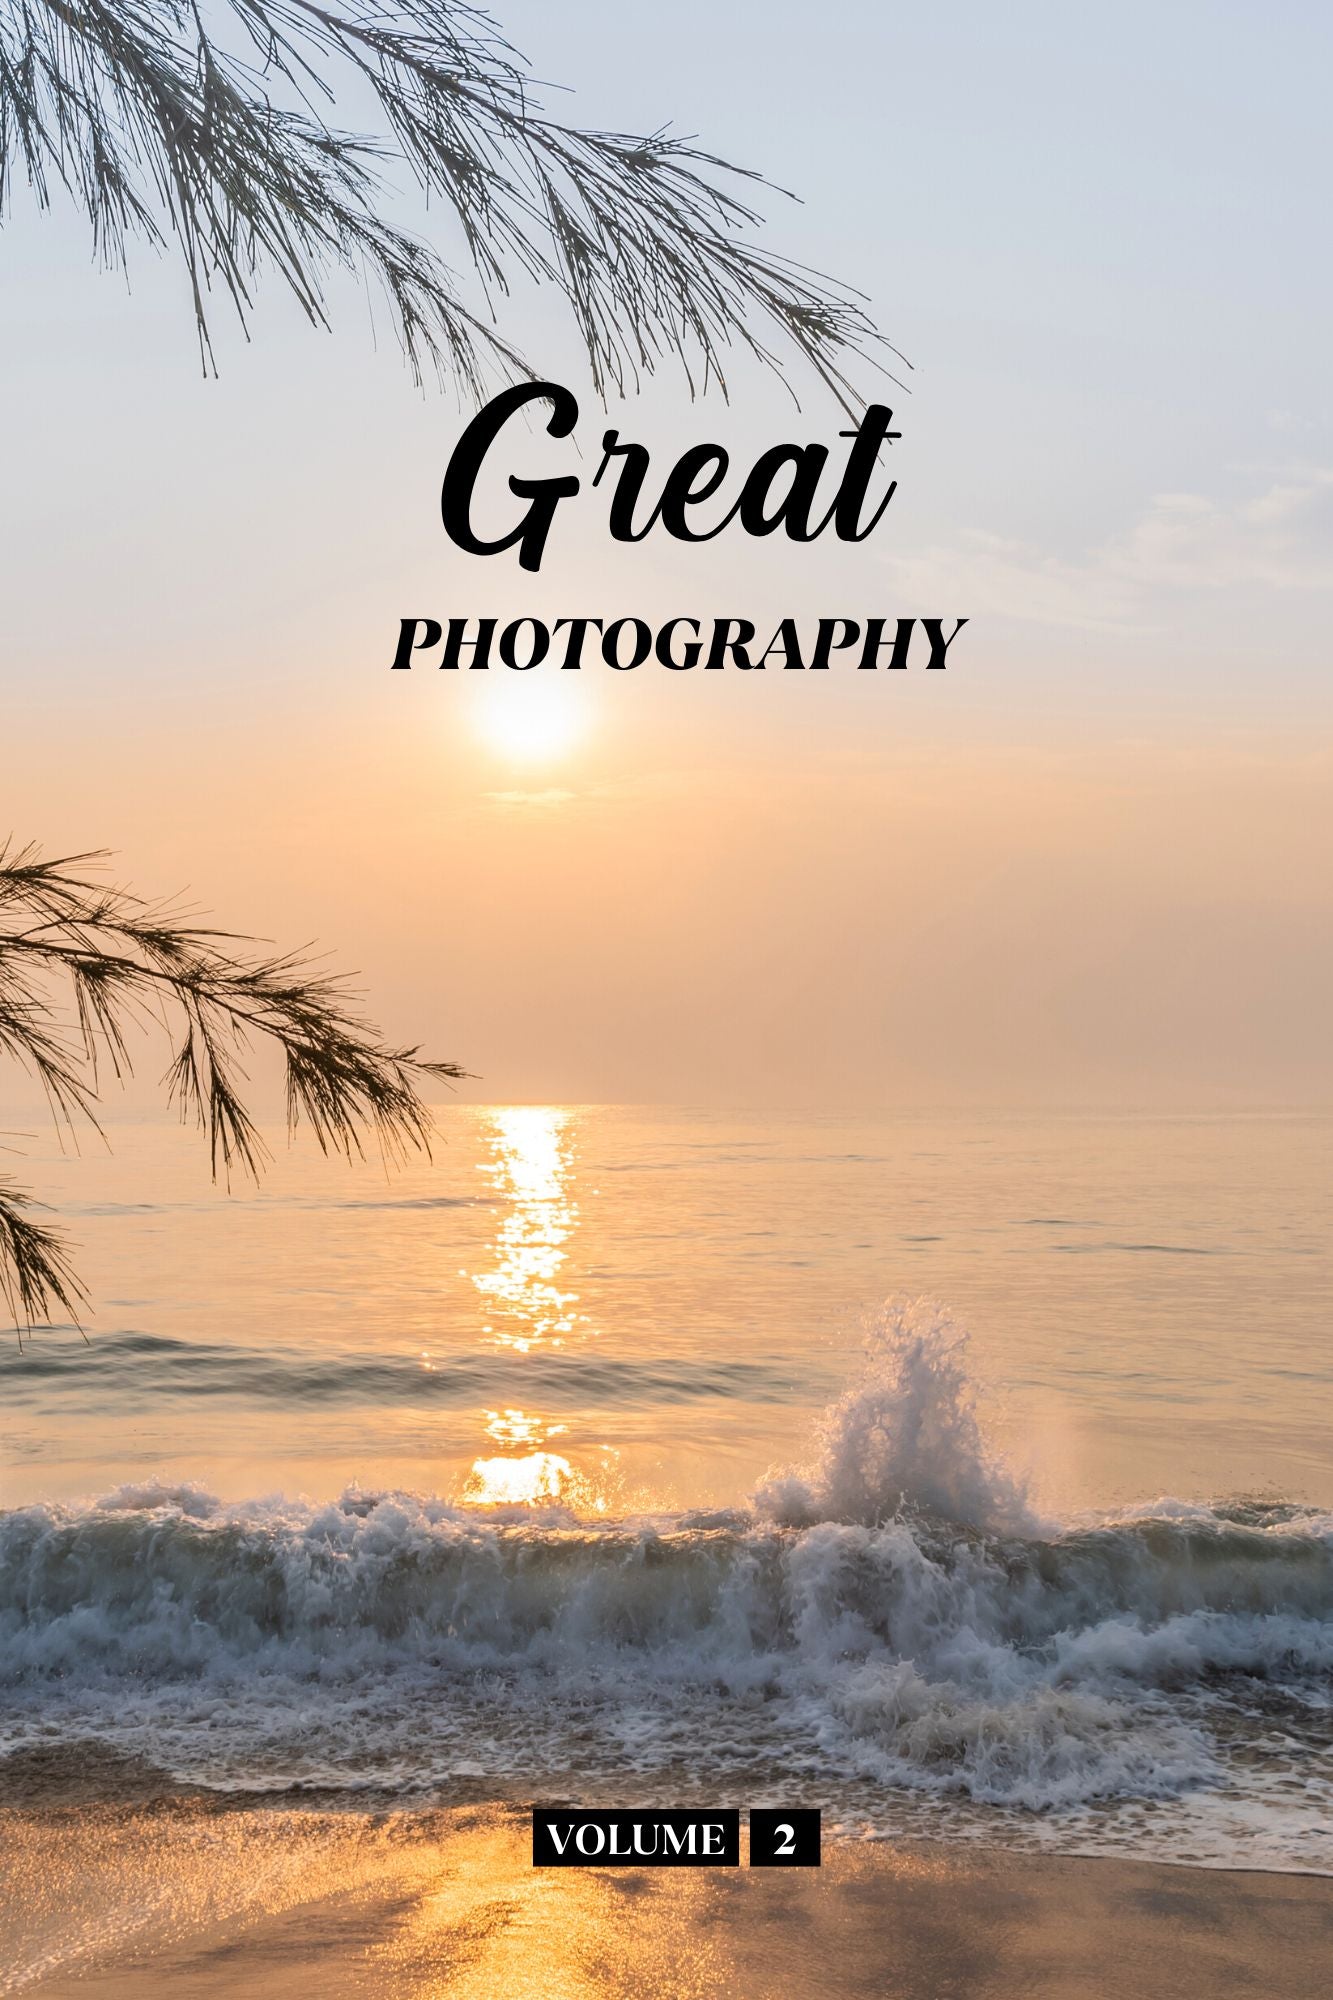 Great Photography Volume 2 (Physical Book)